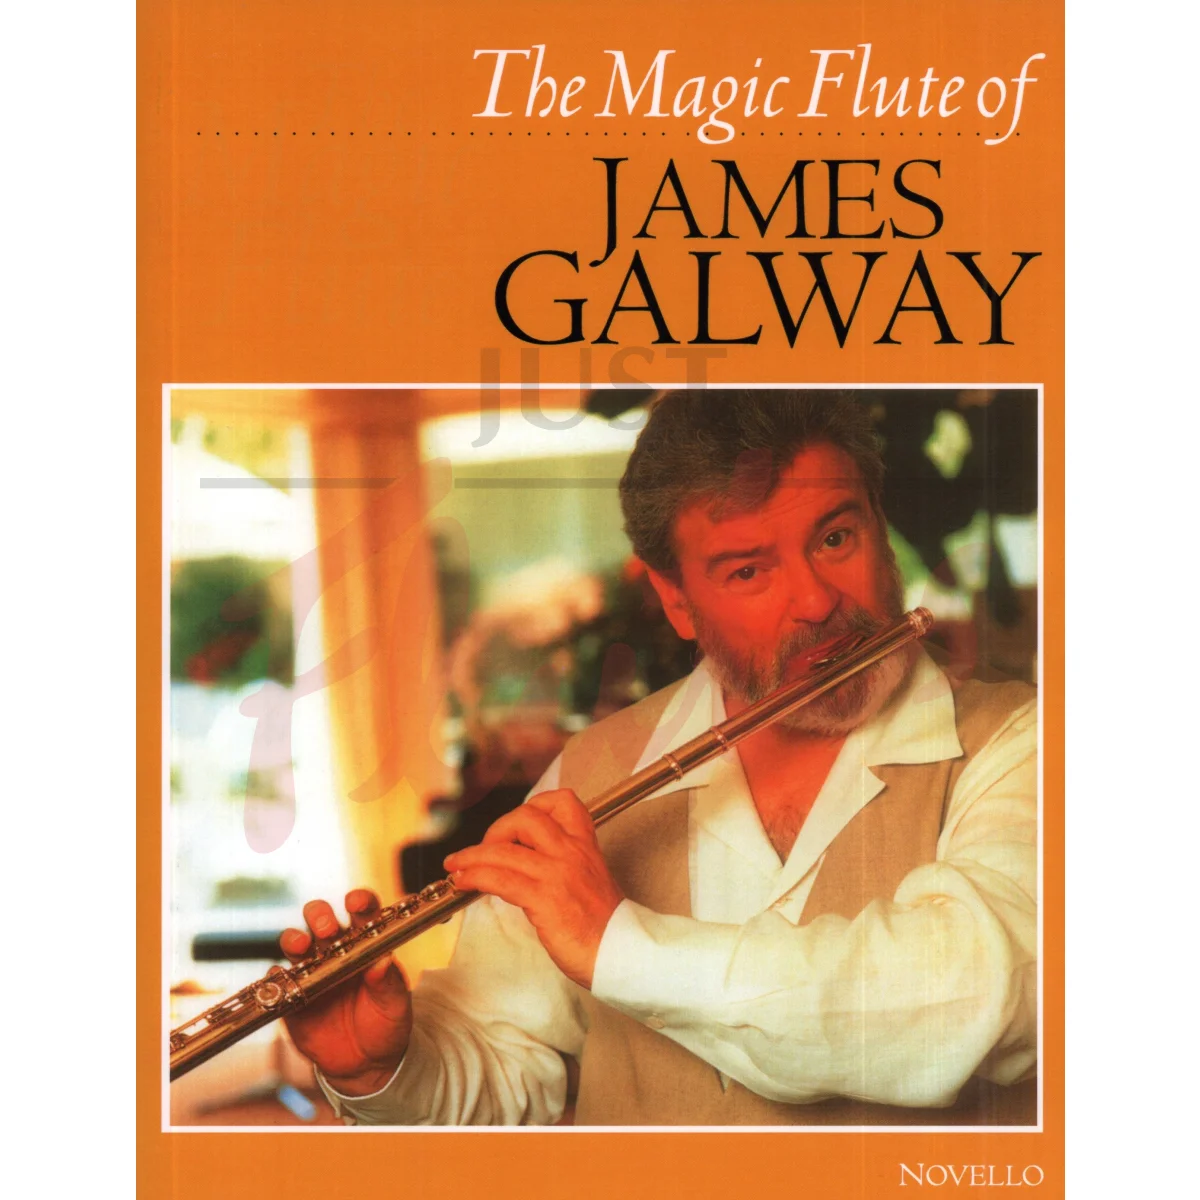 The Magic Flute of James Galway